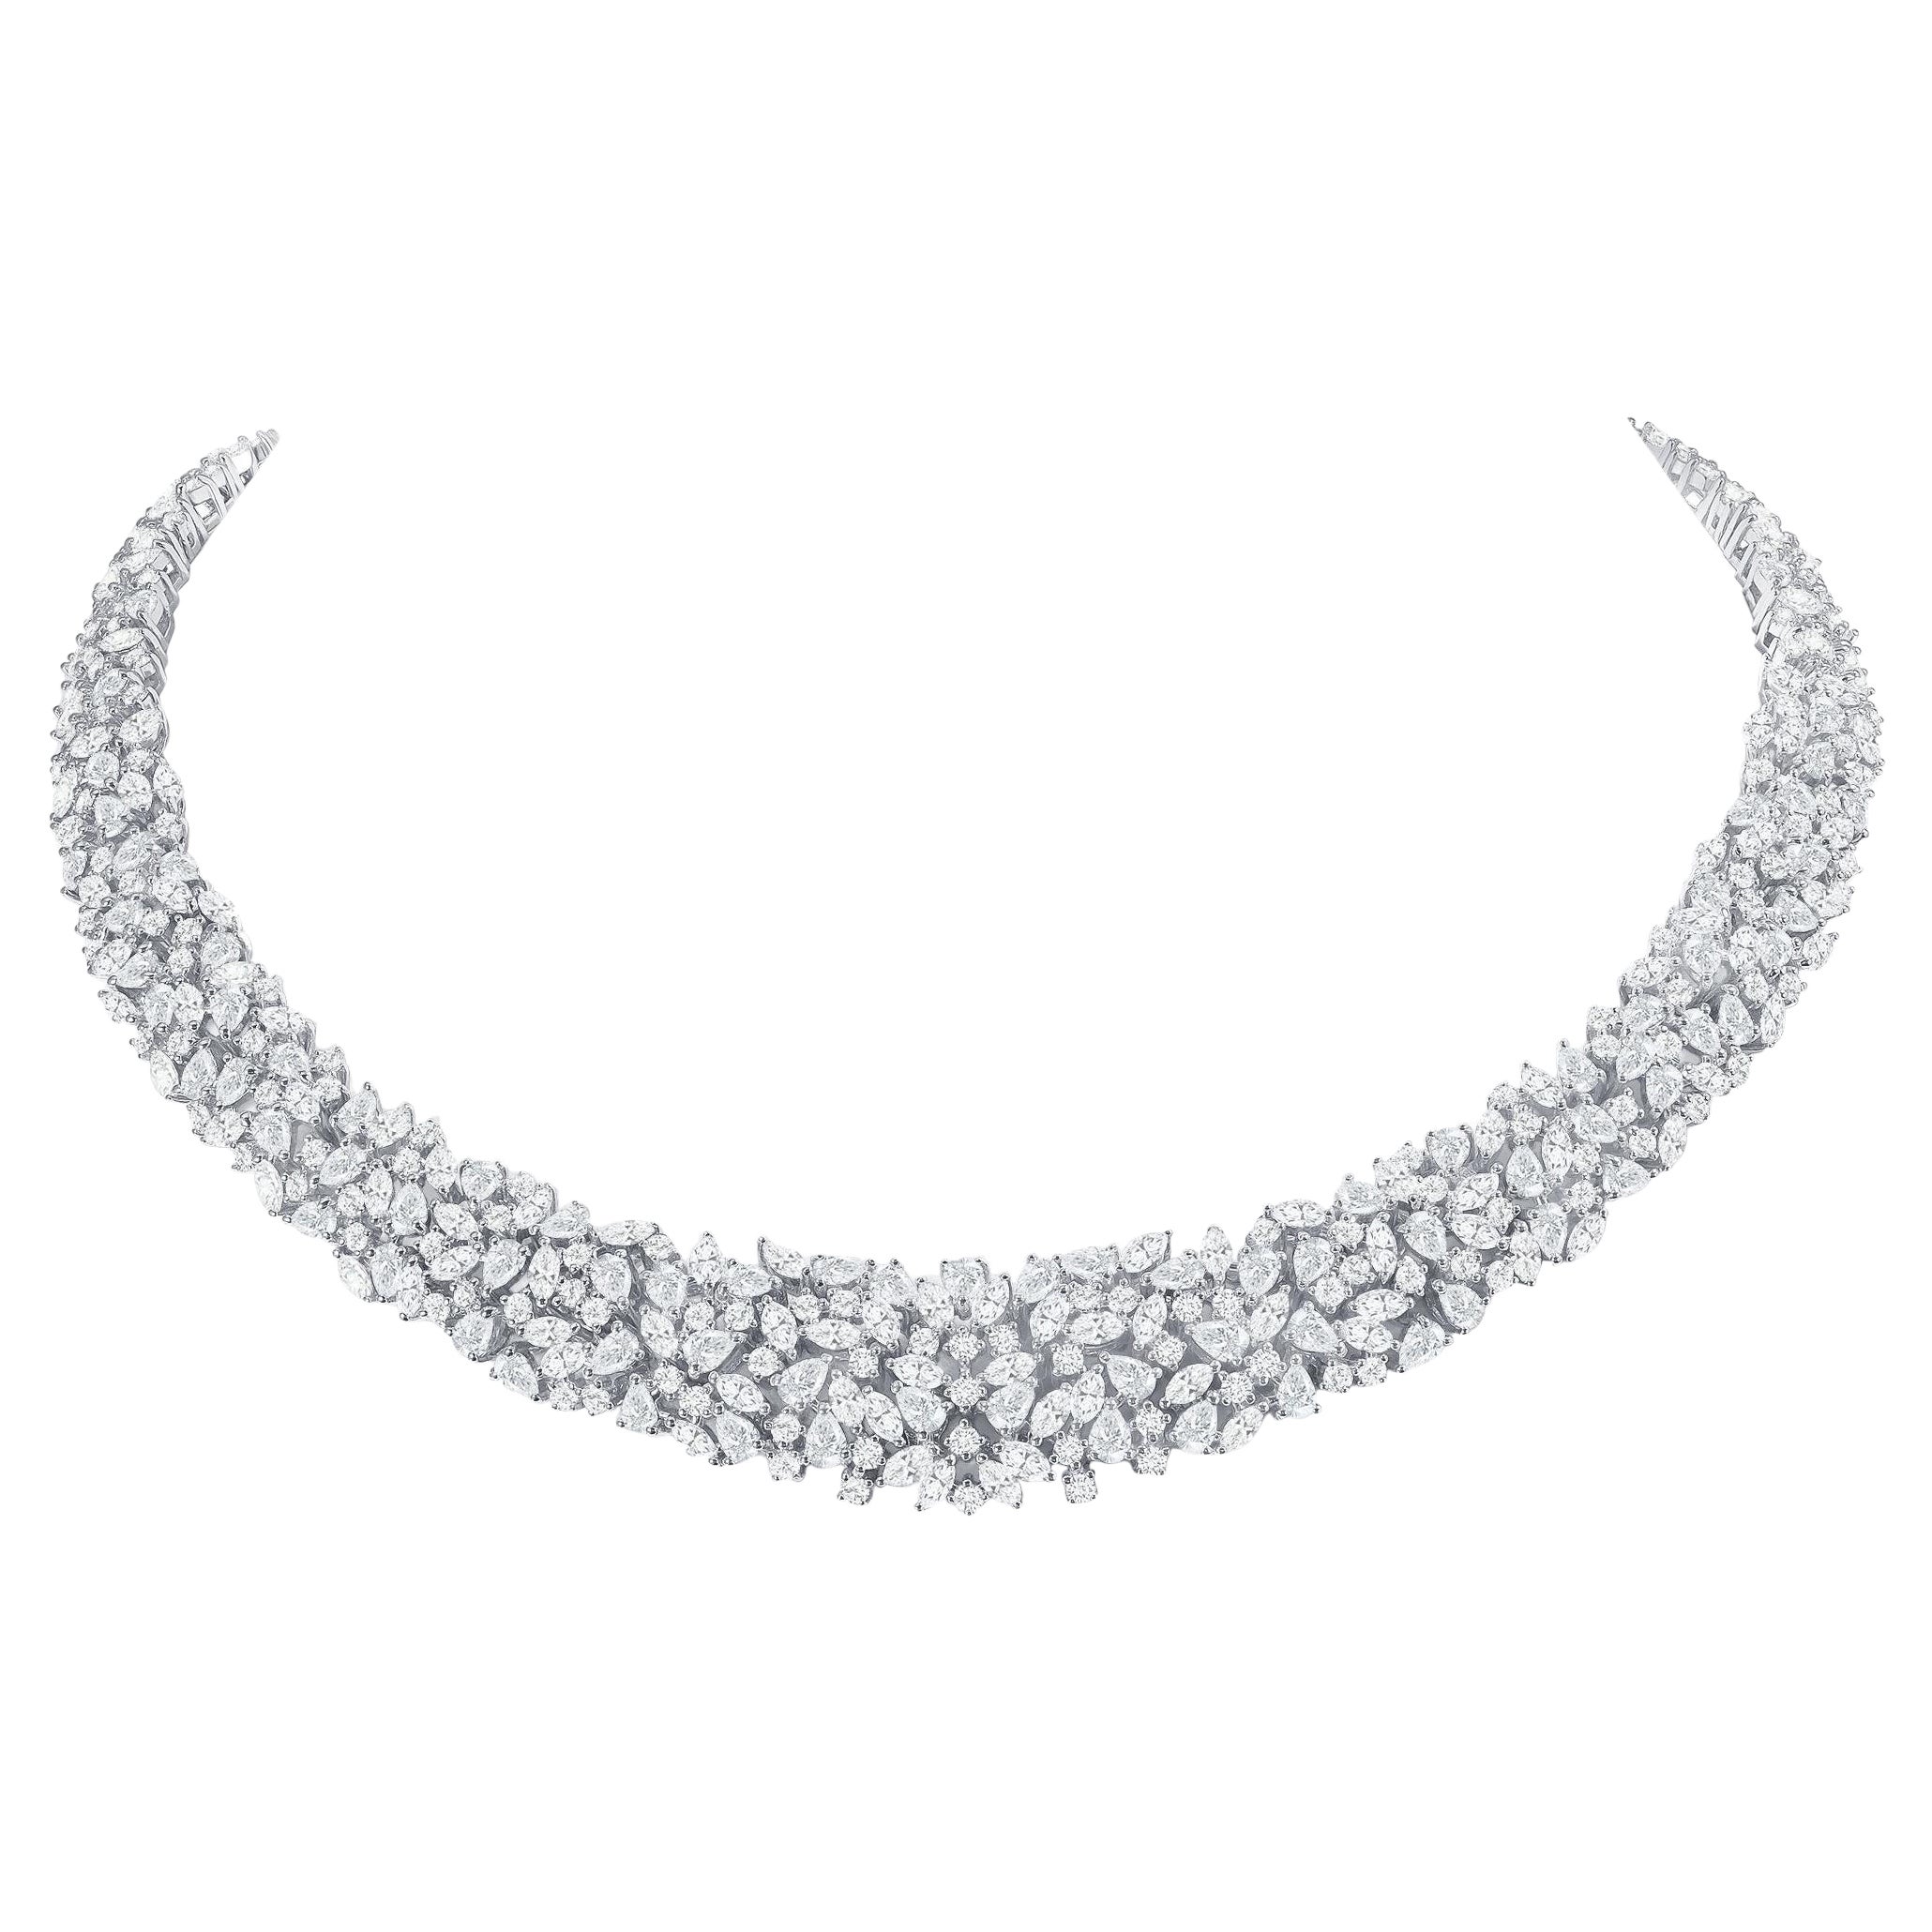 30 Carat Diamond Cluster Necklace, 18K White Gold For Sale